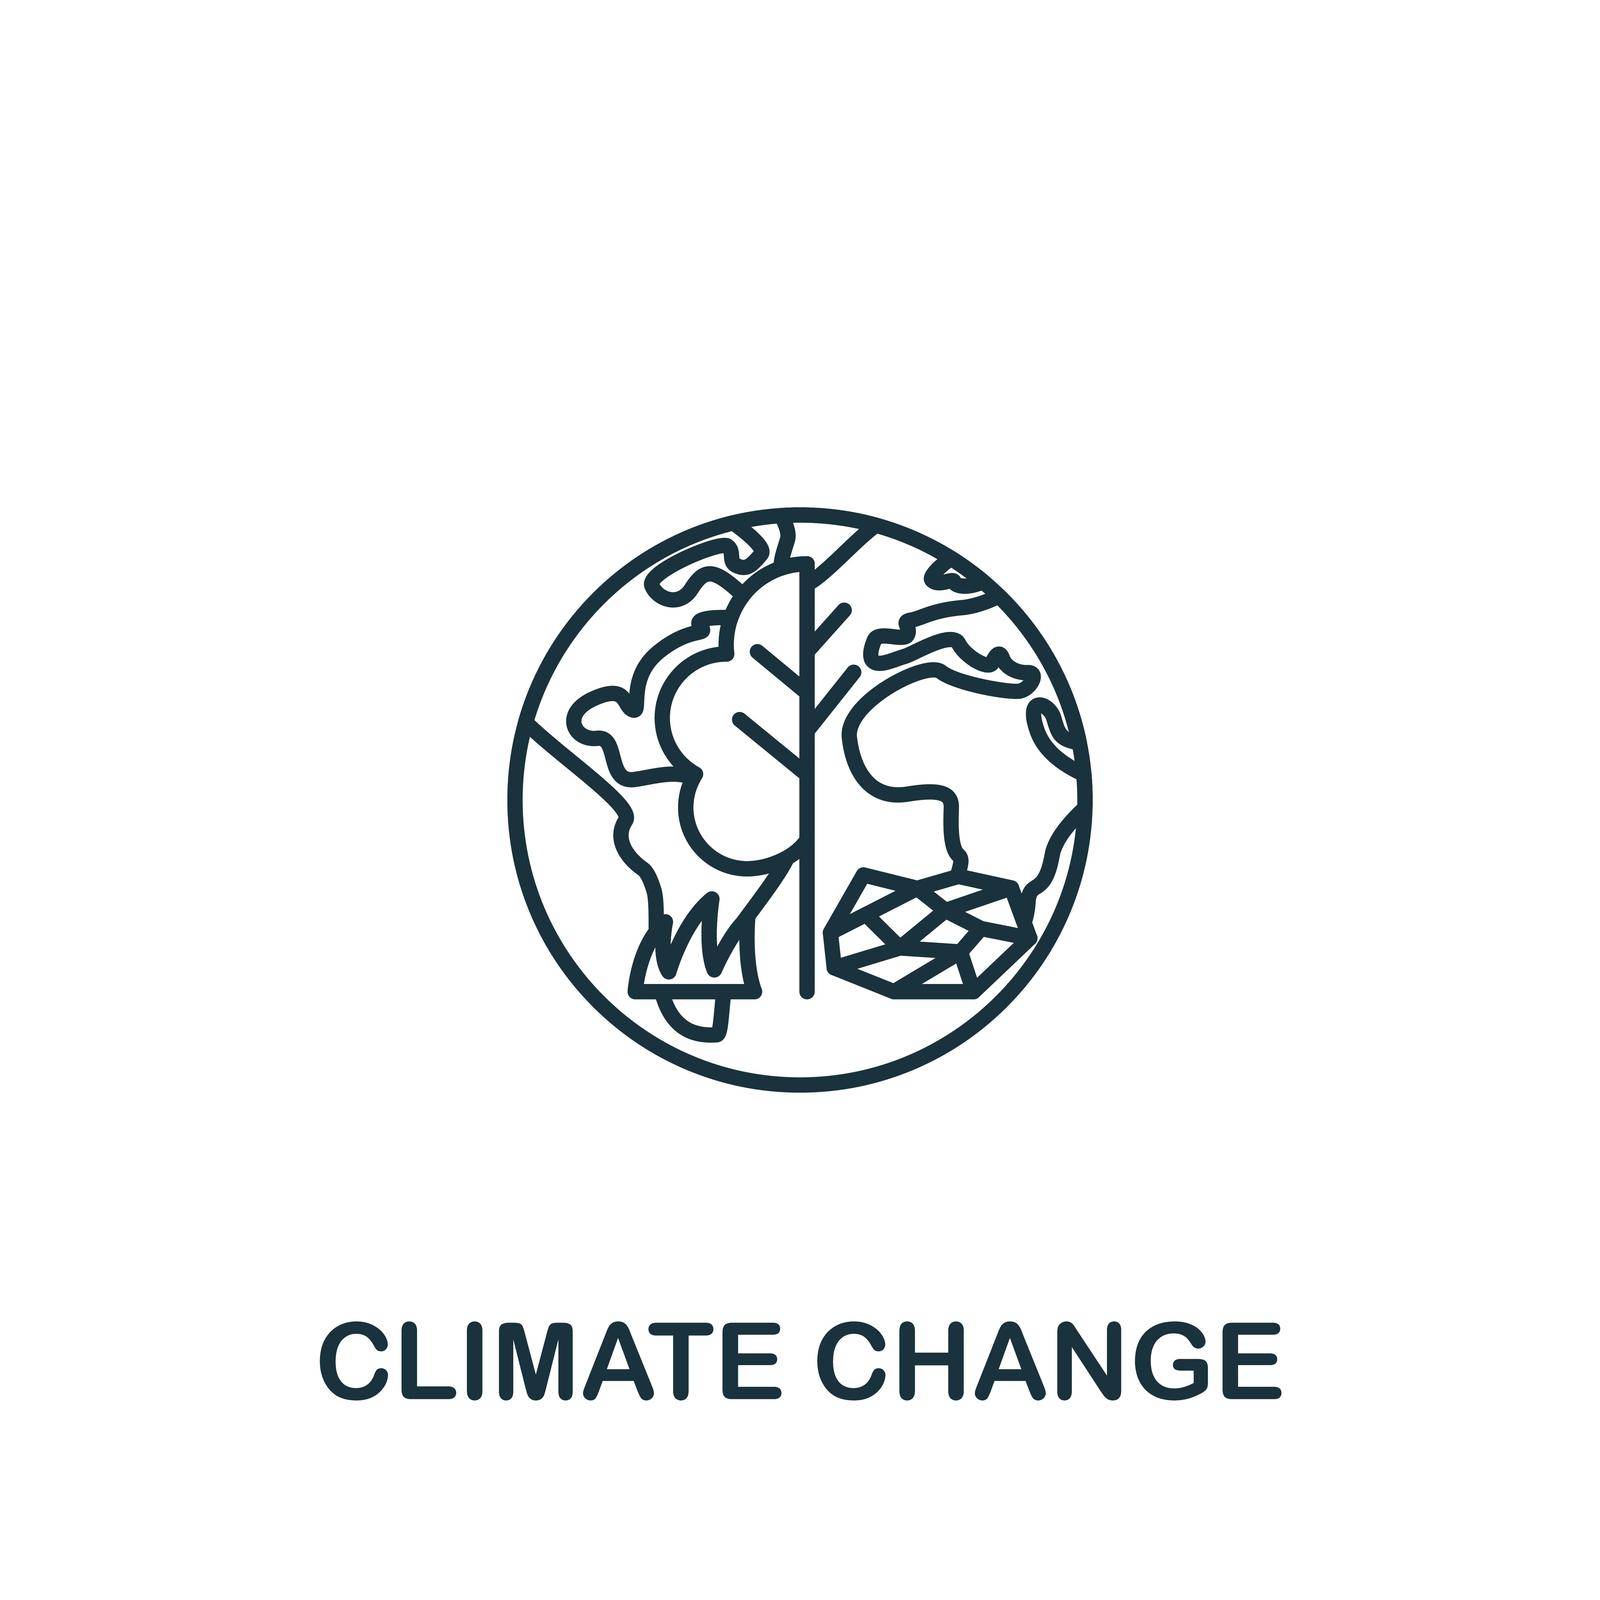 Climate Change icon. Monochrome simple icon for templates, web design and infographics by simakovavector